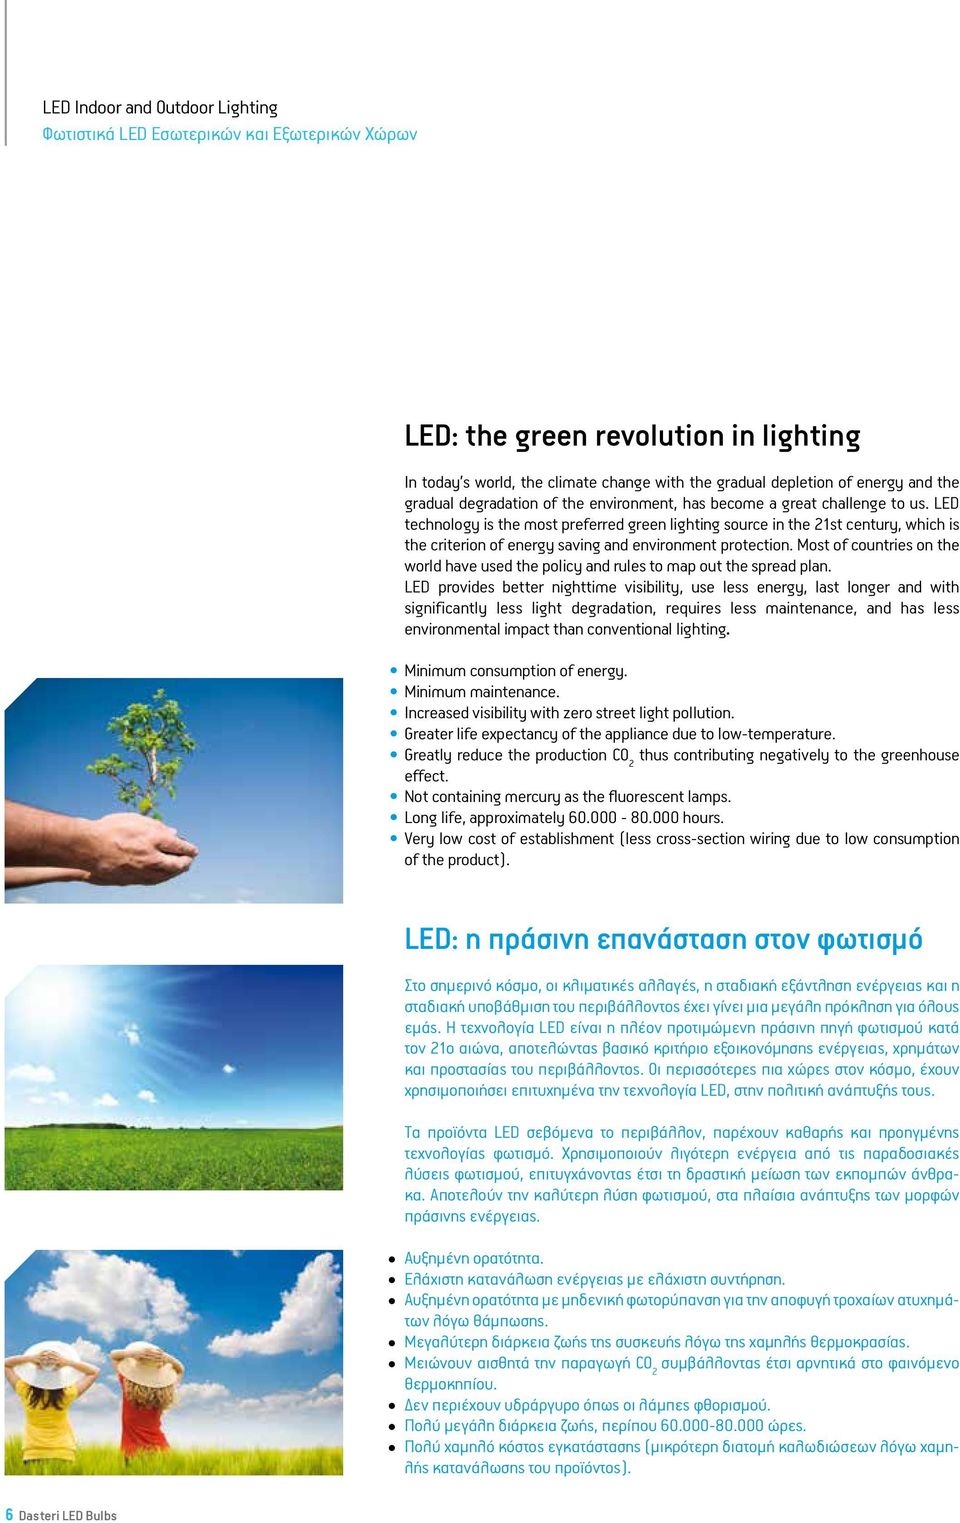 LED technology is the most preferred green lighting source in the 21st century, which is the criterion of energy saving and environment protection.